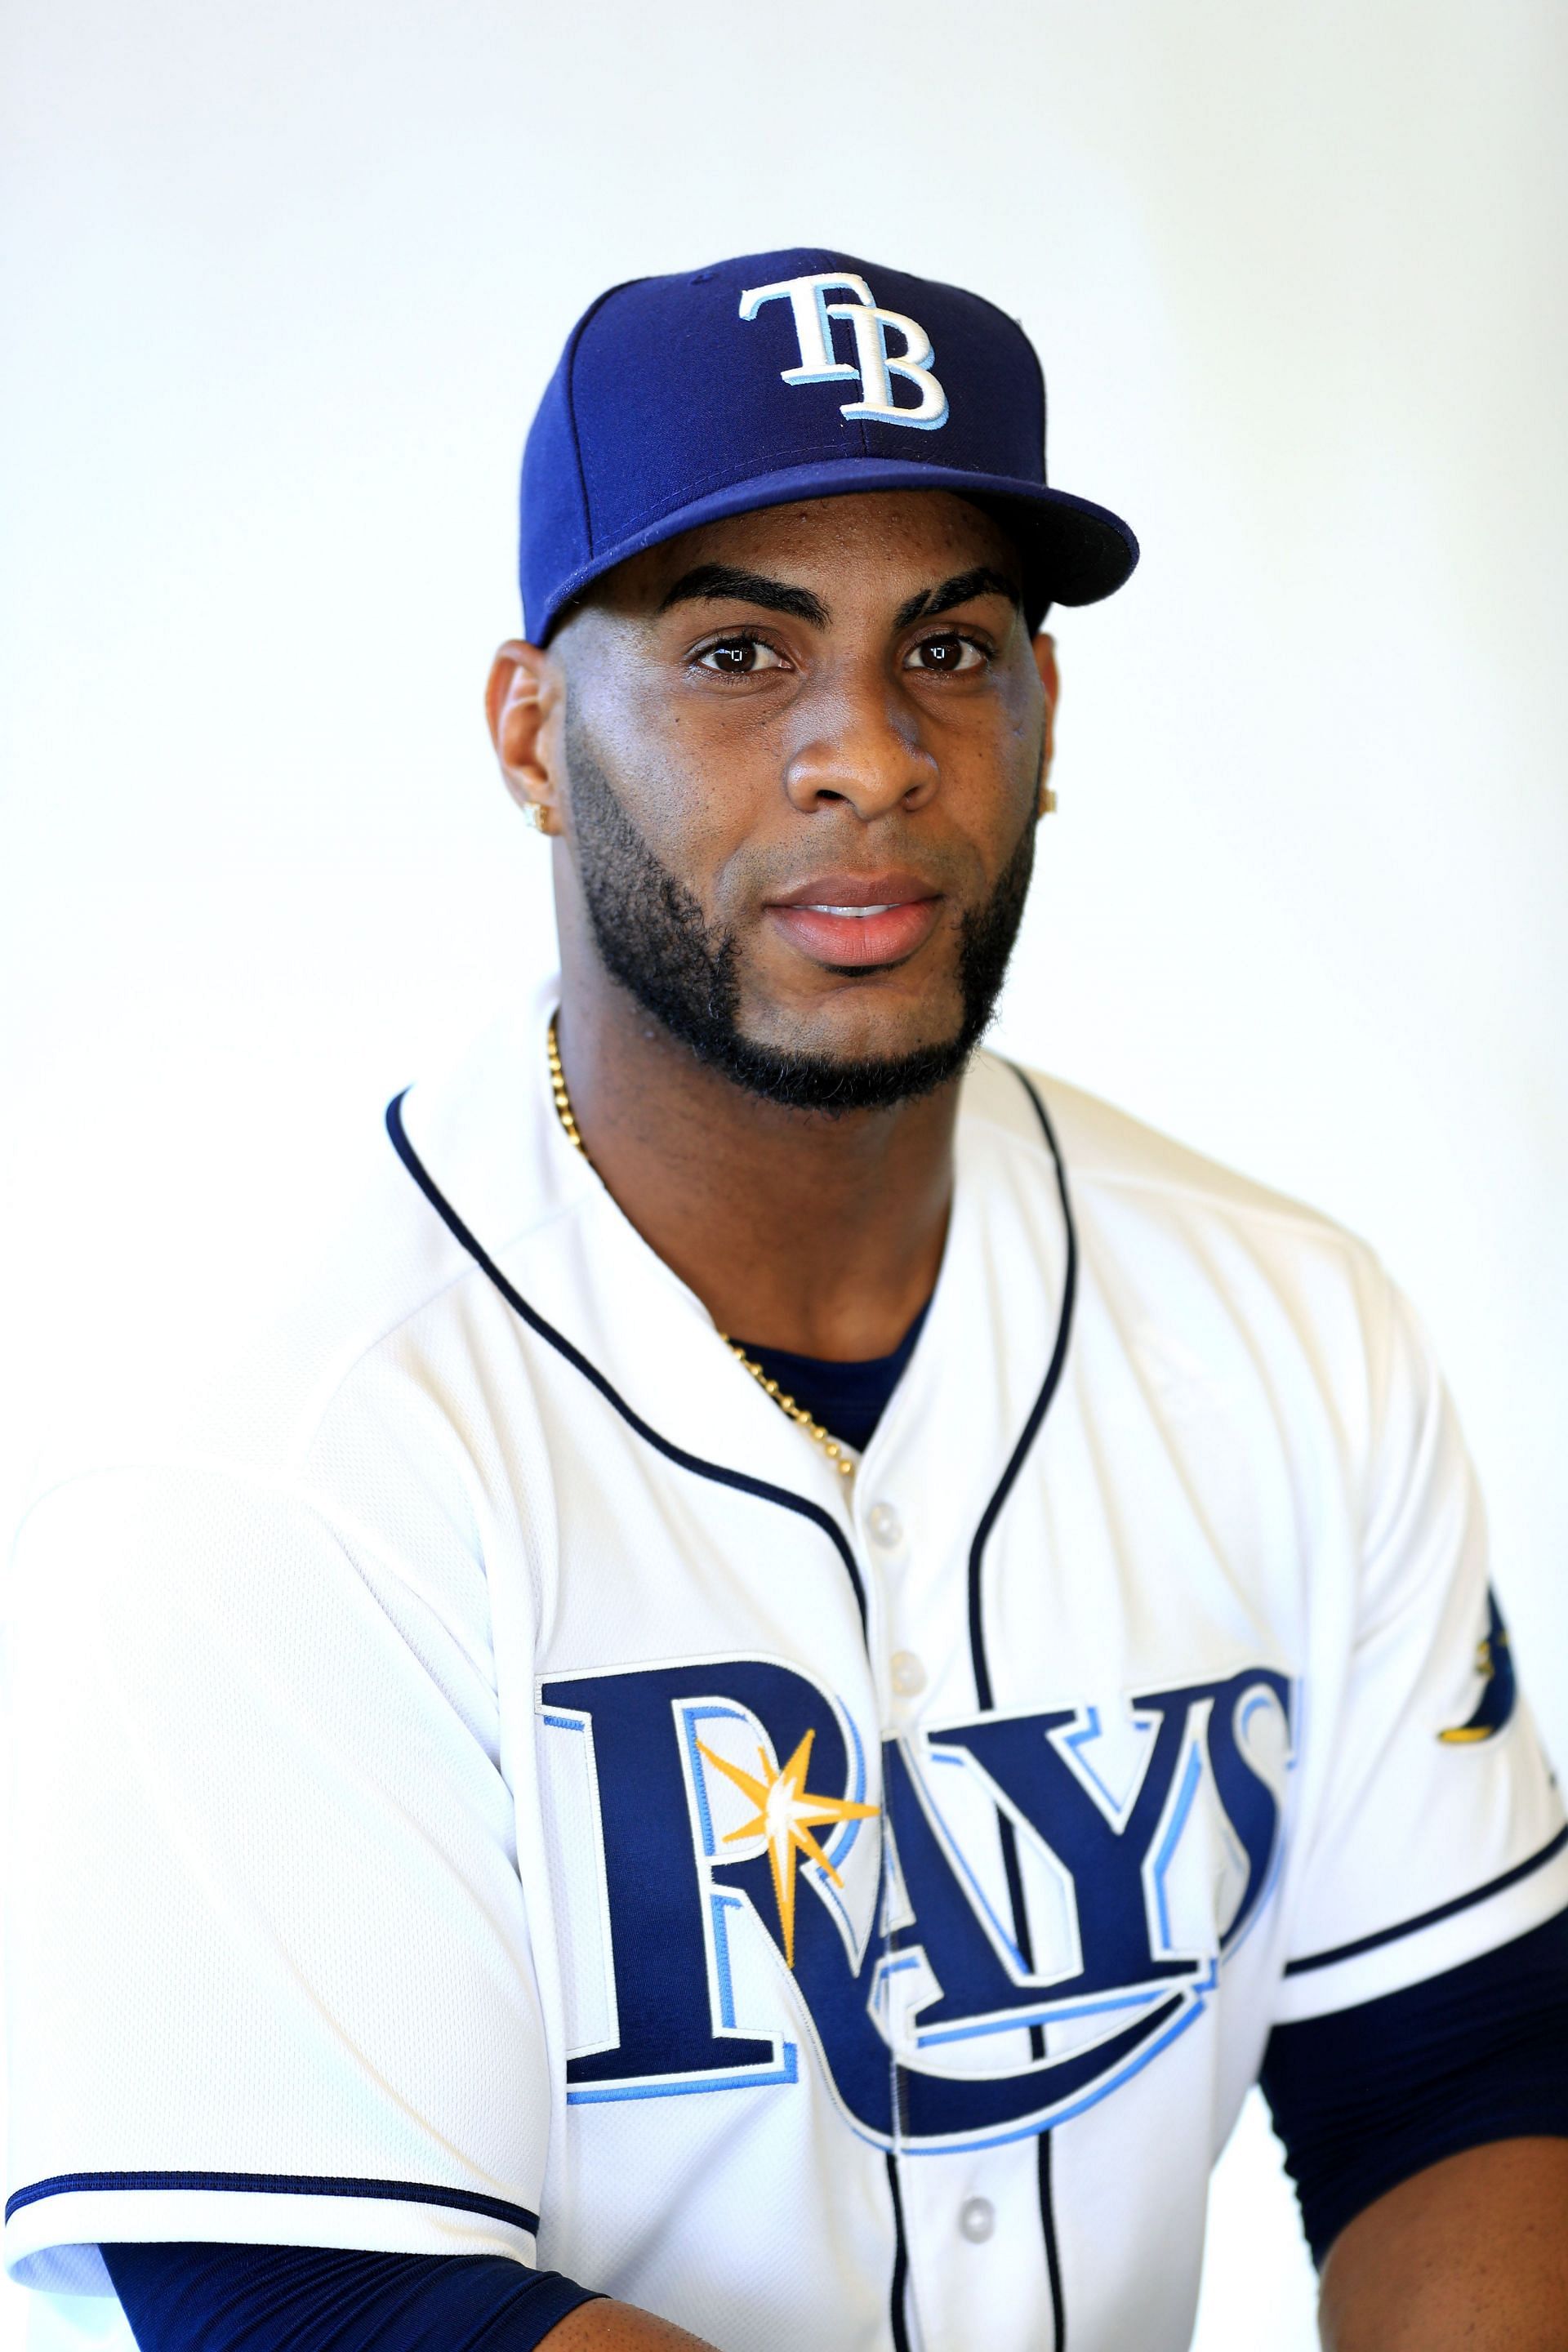 What is Yandy Diaz's Contract?